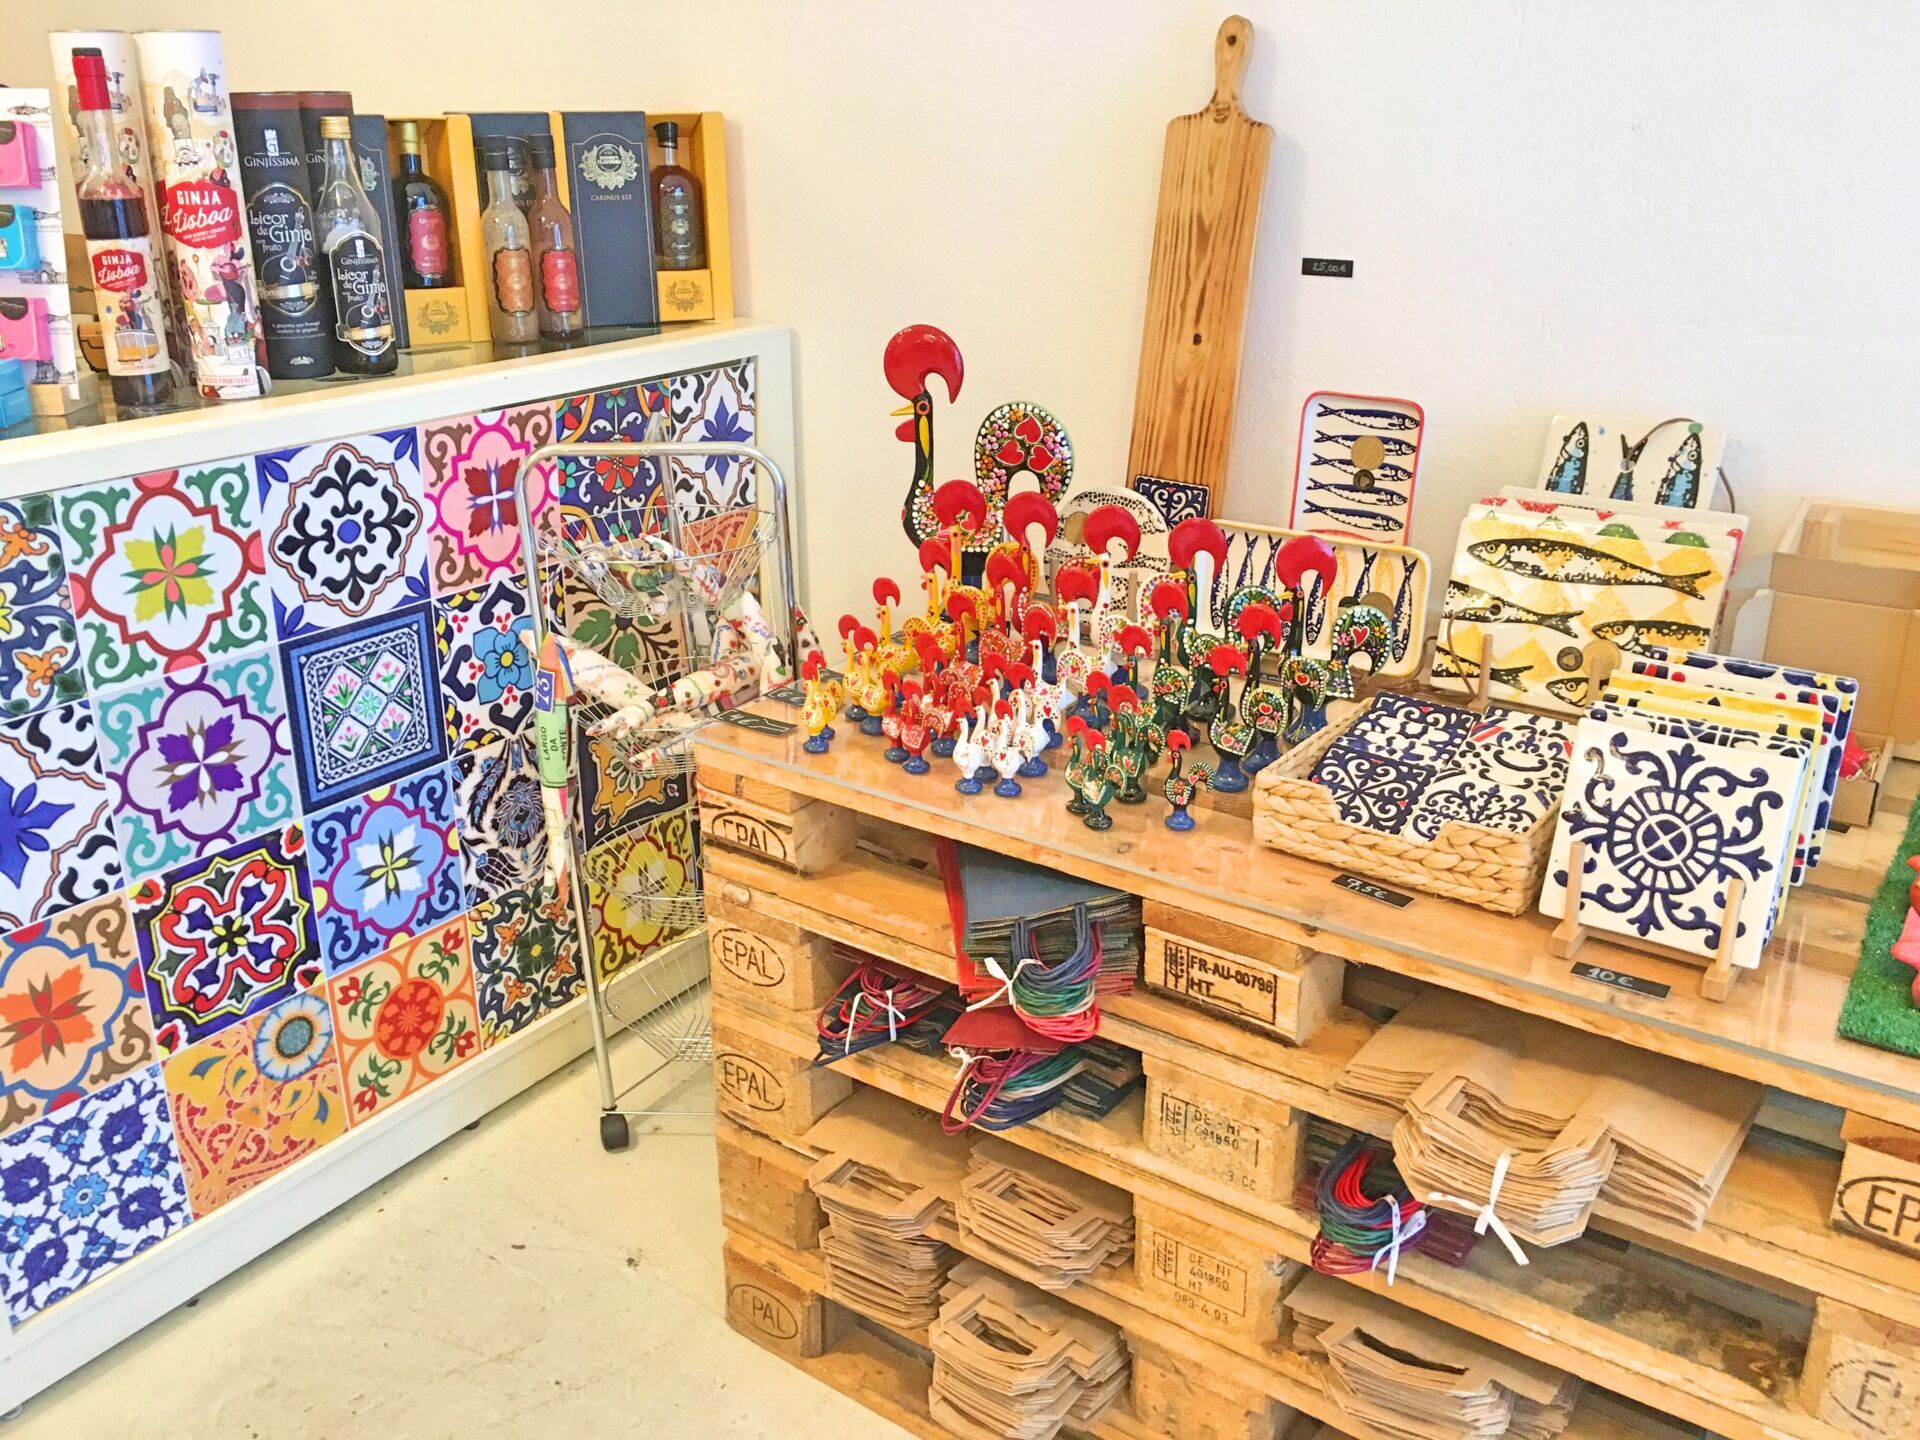 More Than Wine - tiles and souvenirs